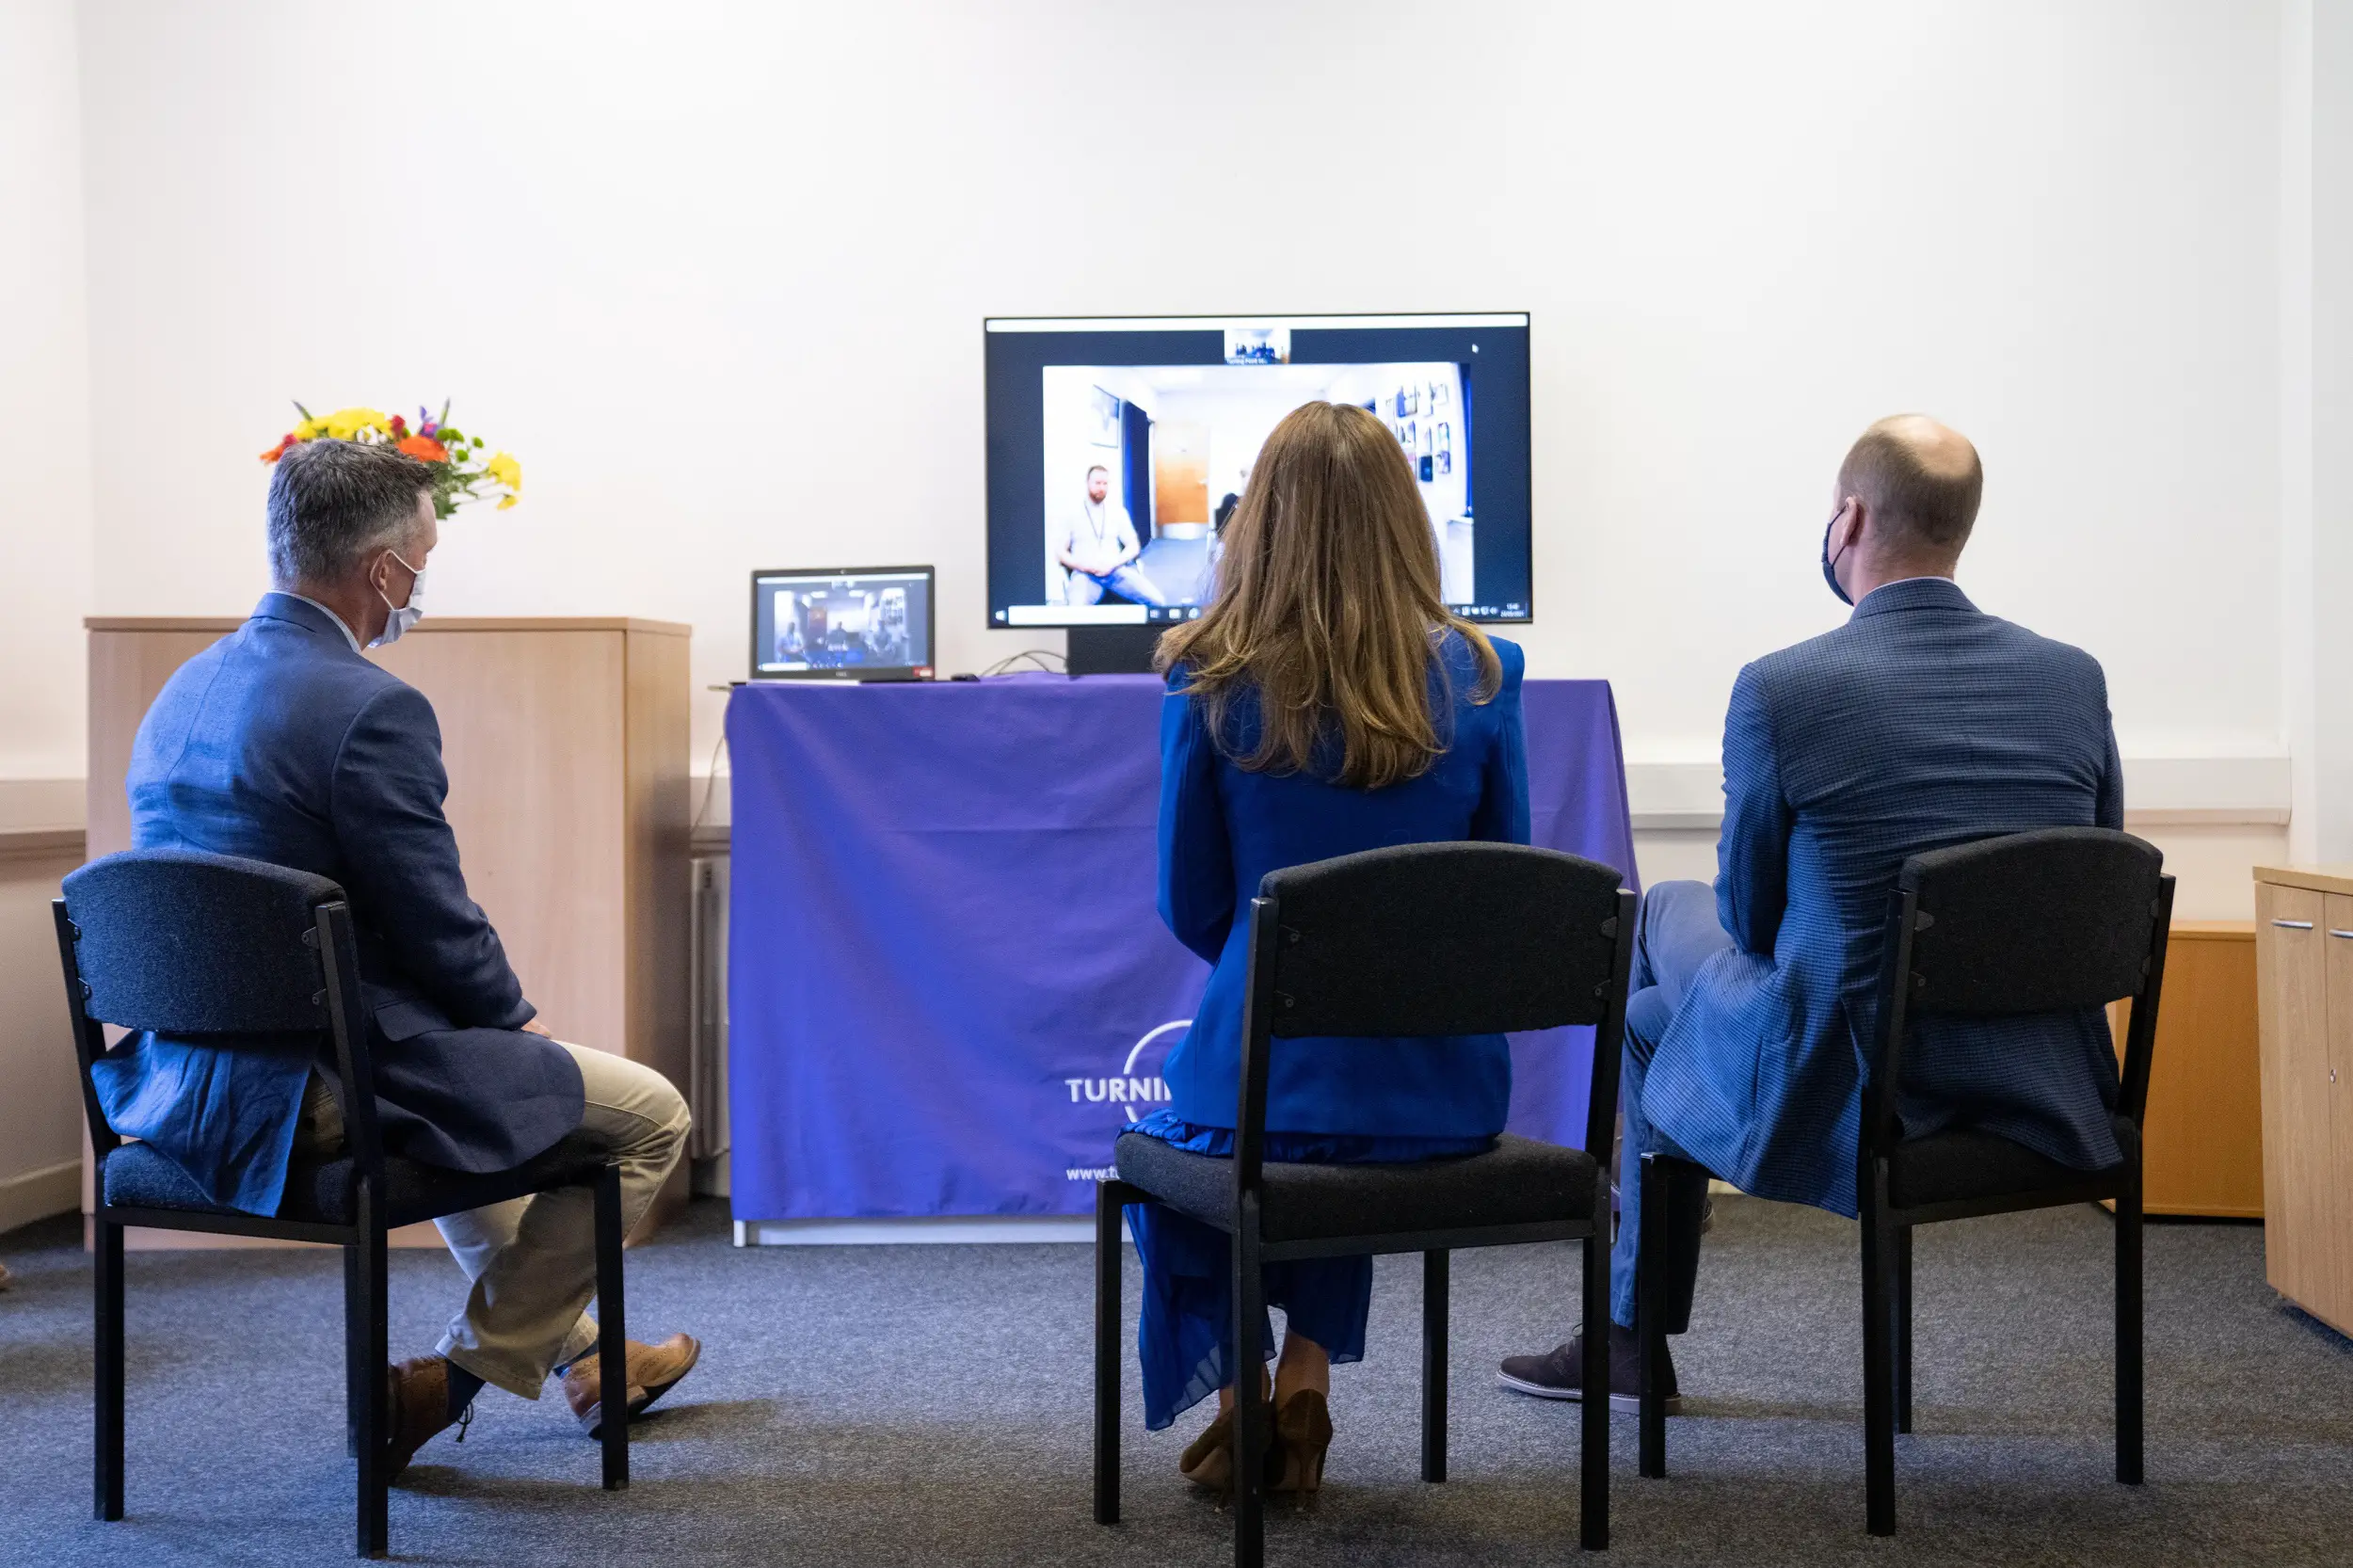 The Duke and Duchess of Cambridge spoke with individuals supported by Turning Point Scotland's (TPS) Turnaround service